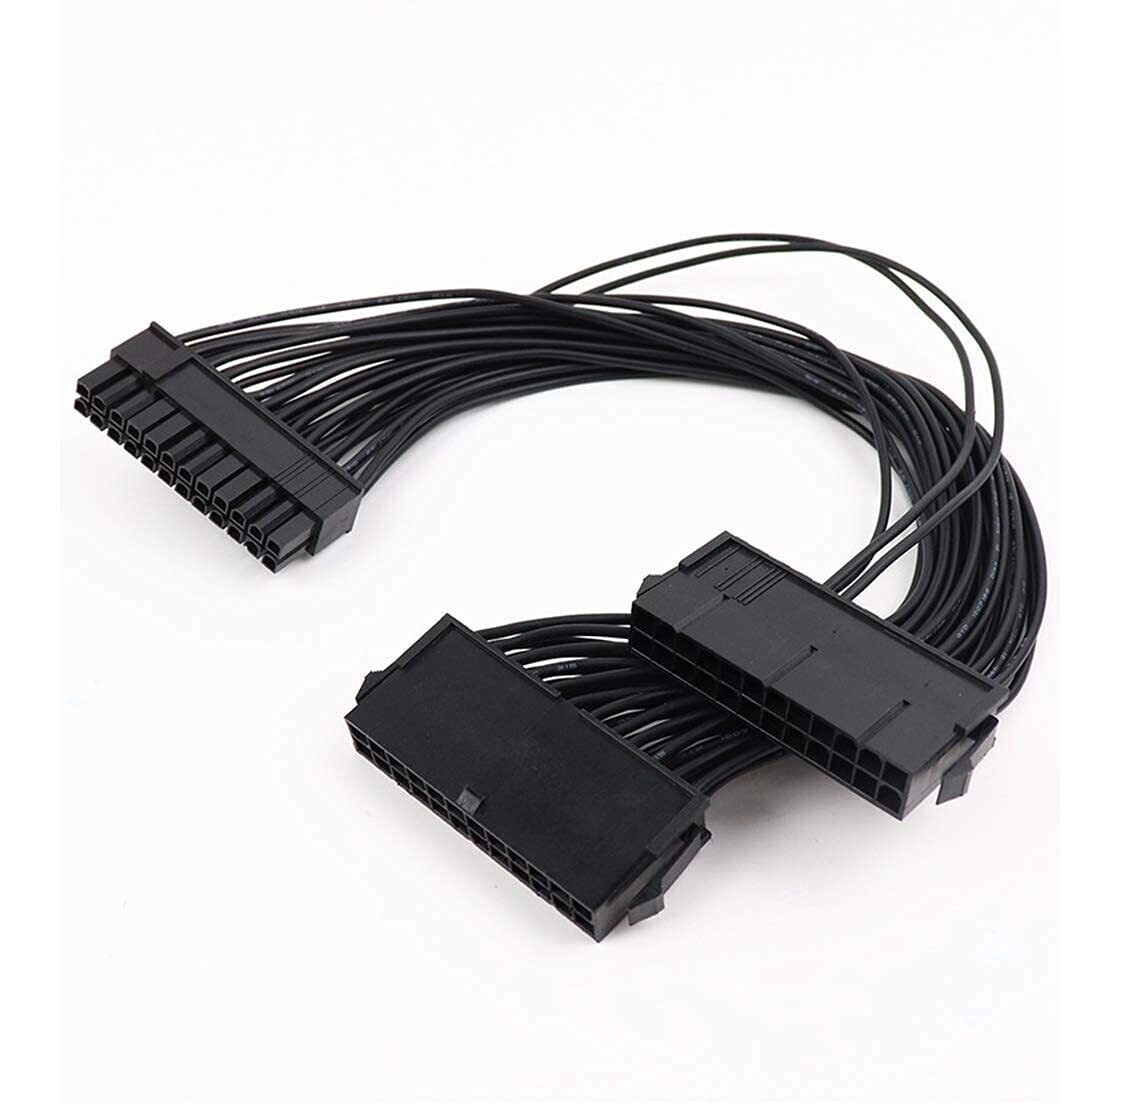 Dual PSU Power Supply Extension Cable for ATX Motherboard